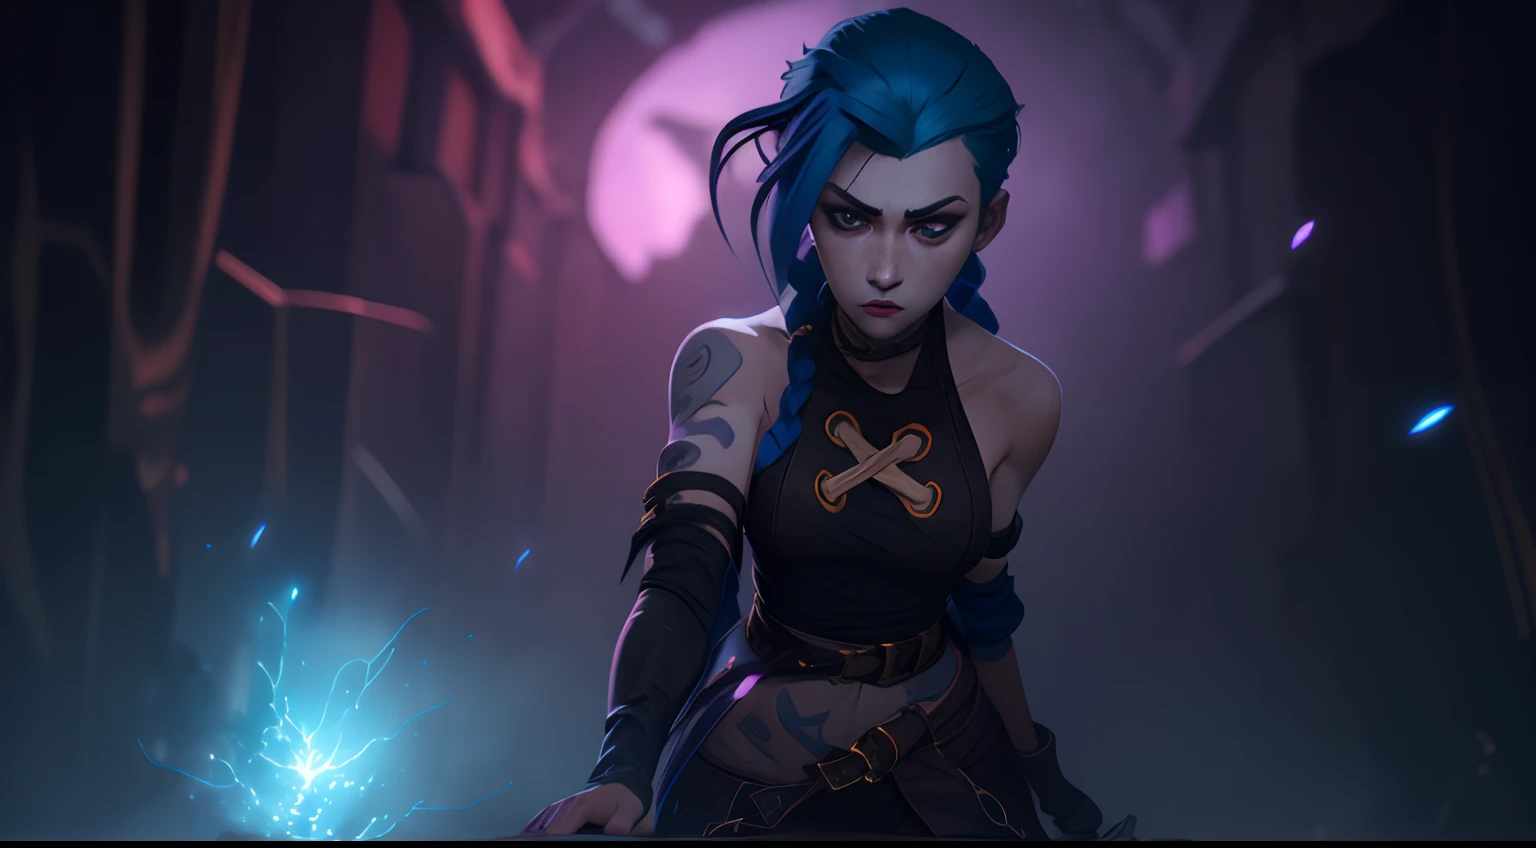 Jinx's character design, Dynamic movements, naked ass, bare breast, covers the chest with his hands, Swollen ,  butt, kitty, sexypose, Beautiful figure, Arcane's Jinx, Bright blue and purple sparks all around, glowing eyes, Pink glowing eyes, hairlong, hairsh, braided into long braids, Pigtails hang below the knee, Hair color changes from bright blue to navy blue, Dressed in brown breeches, Leather boots on the feet, Top with four gold circles on the chest in the middle of the chest, Blue cloud tattoos on shoulders and waist, Long bangs, hanging on the right side, Belt with cartridges on the belt, Arcane style, extremely detailed CG unity 8k wallpaper, detailed light, Cinematic lighting, chromatic aberration, glittering, expressionless, epic composition, dark in the background, Cherecter Desing, Very detailed, Detailed body, Vibrants, Detailed Face, sharp-focus, anime art, Vibrants, Detailed Face, Hugh Details, sharp-focus, Very drooping face, A detailed eye, super fine illustration, better shadow, finely detail, Beautiful detailed glow, Beautiful detailed, Extremely detailed, expressionless, epic composition,